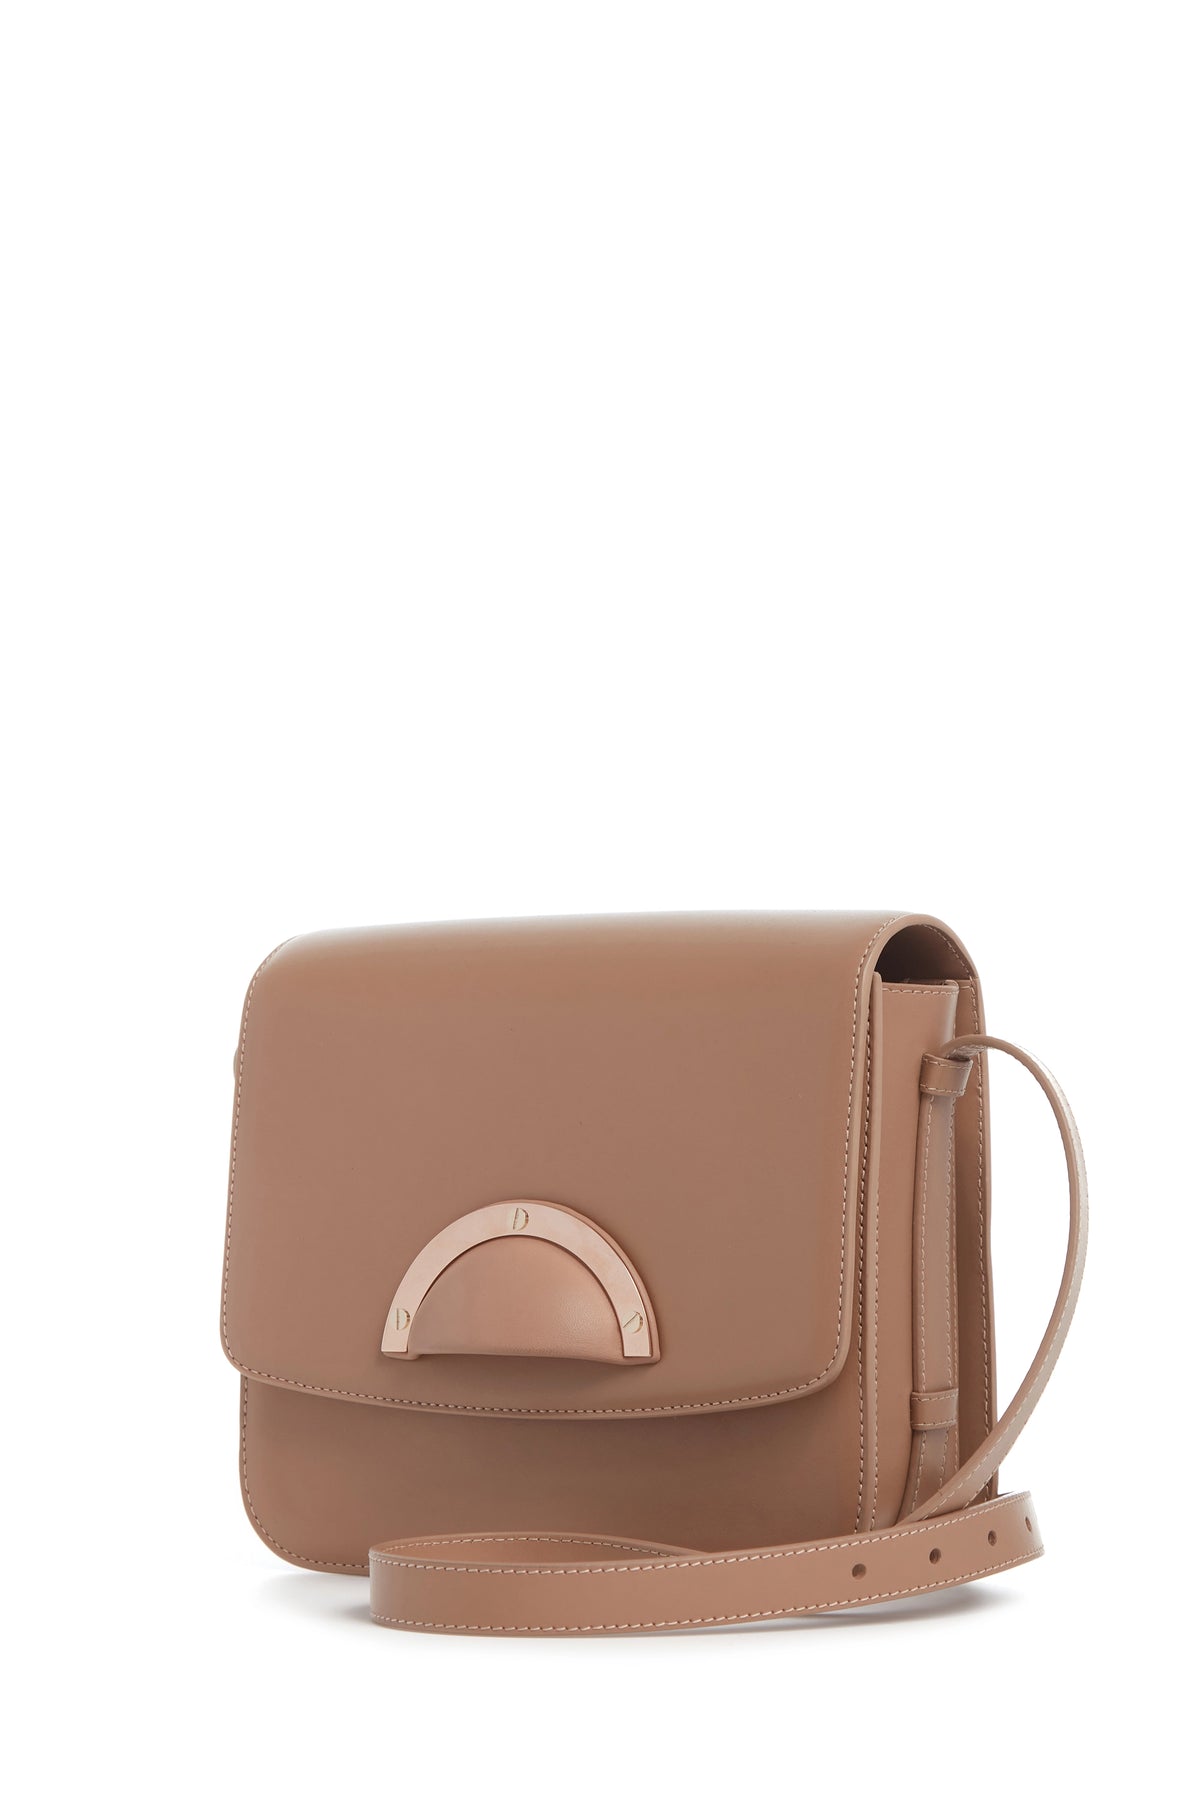 Bethania Crossbody Box Bag in Nude Leather